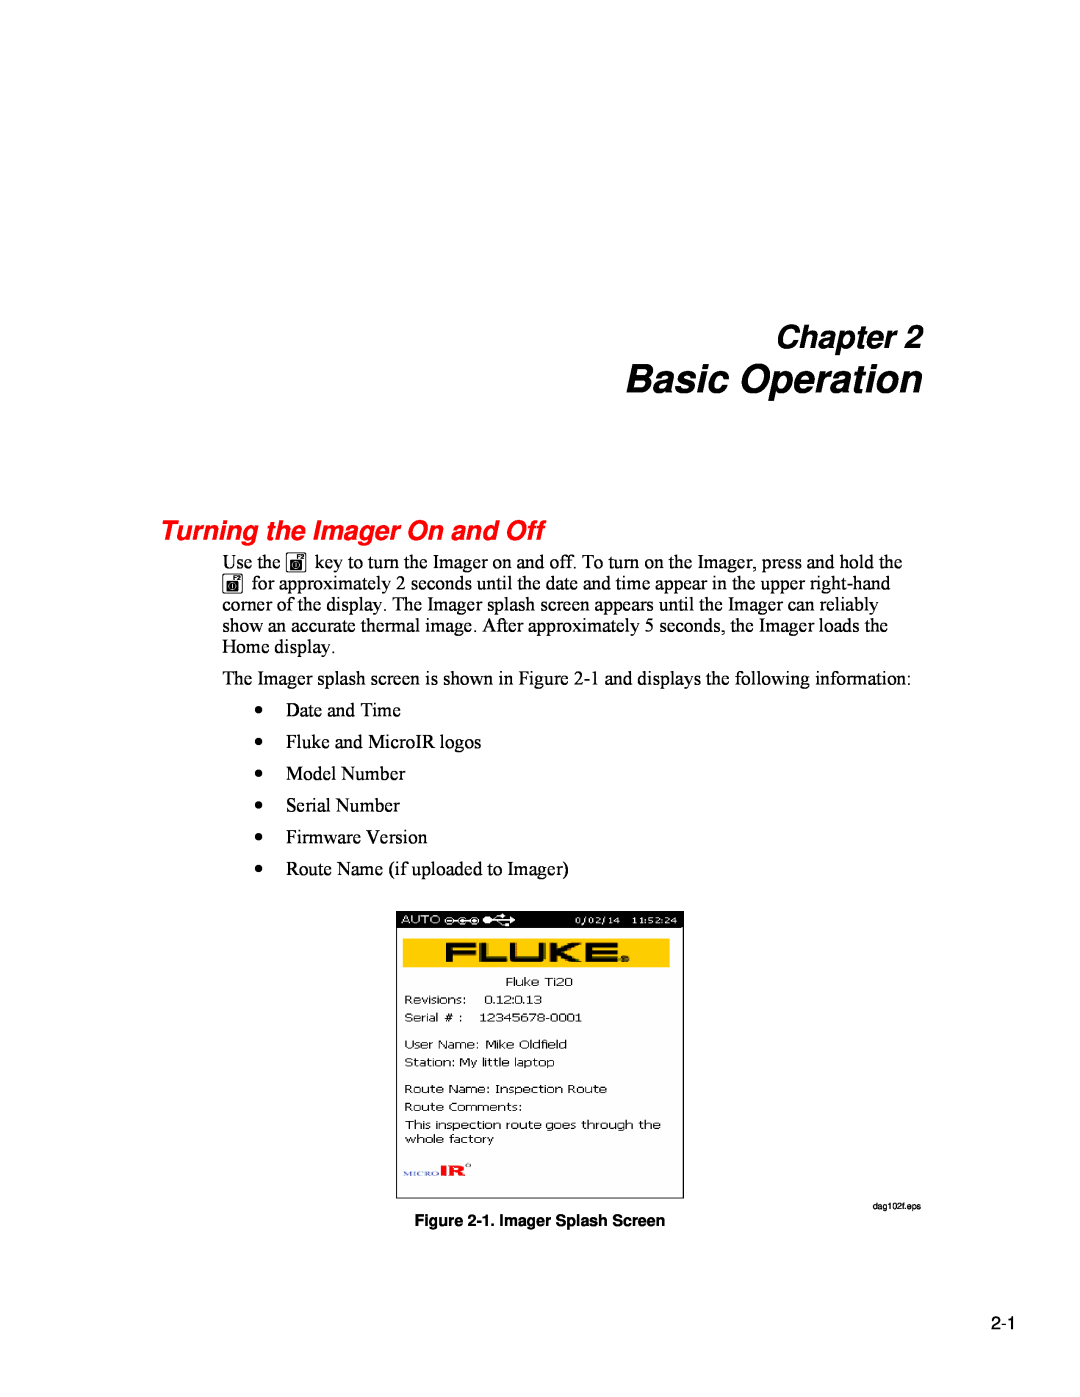 Fluke Ti20 user manual Basic Operation, Turning the Imager On and Off, Chapter 